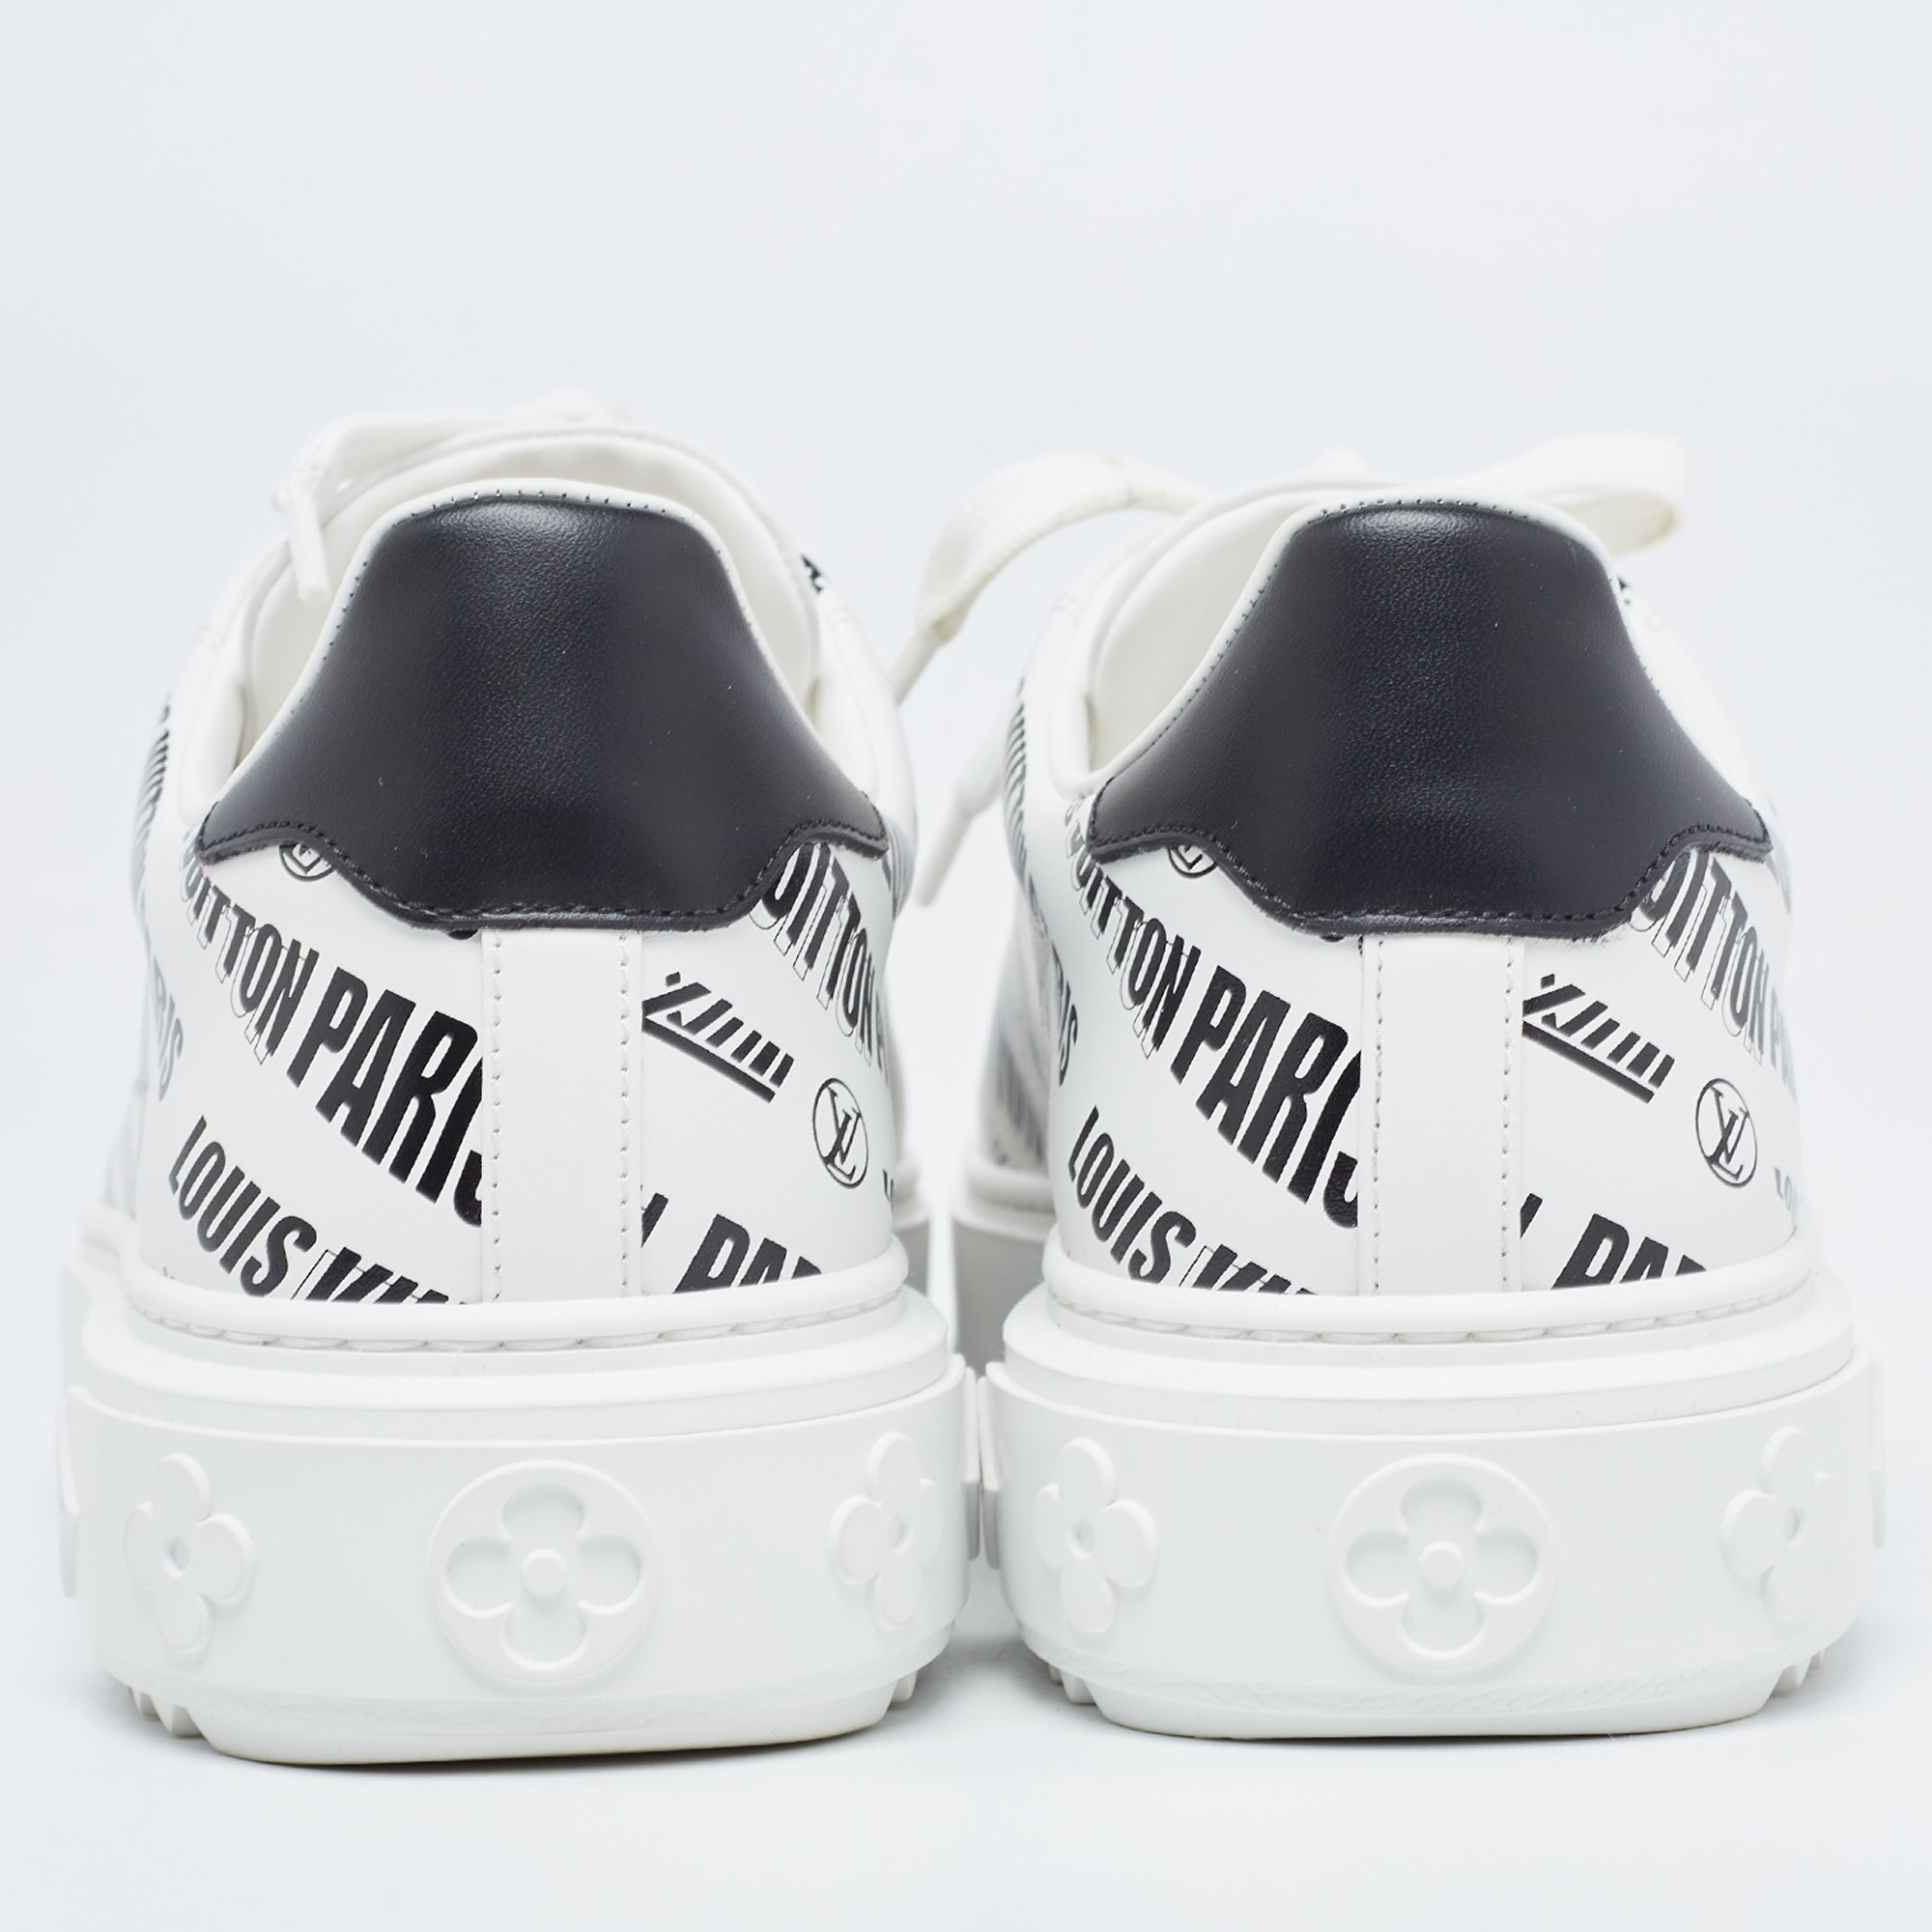 Louis Vuitton White/Black Leather Time Out Trainers Sneakers Size 38